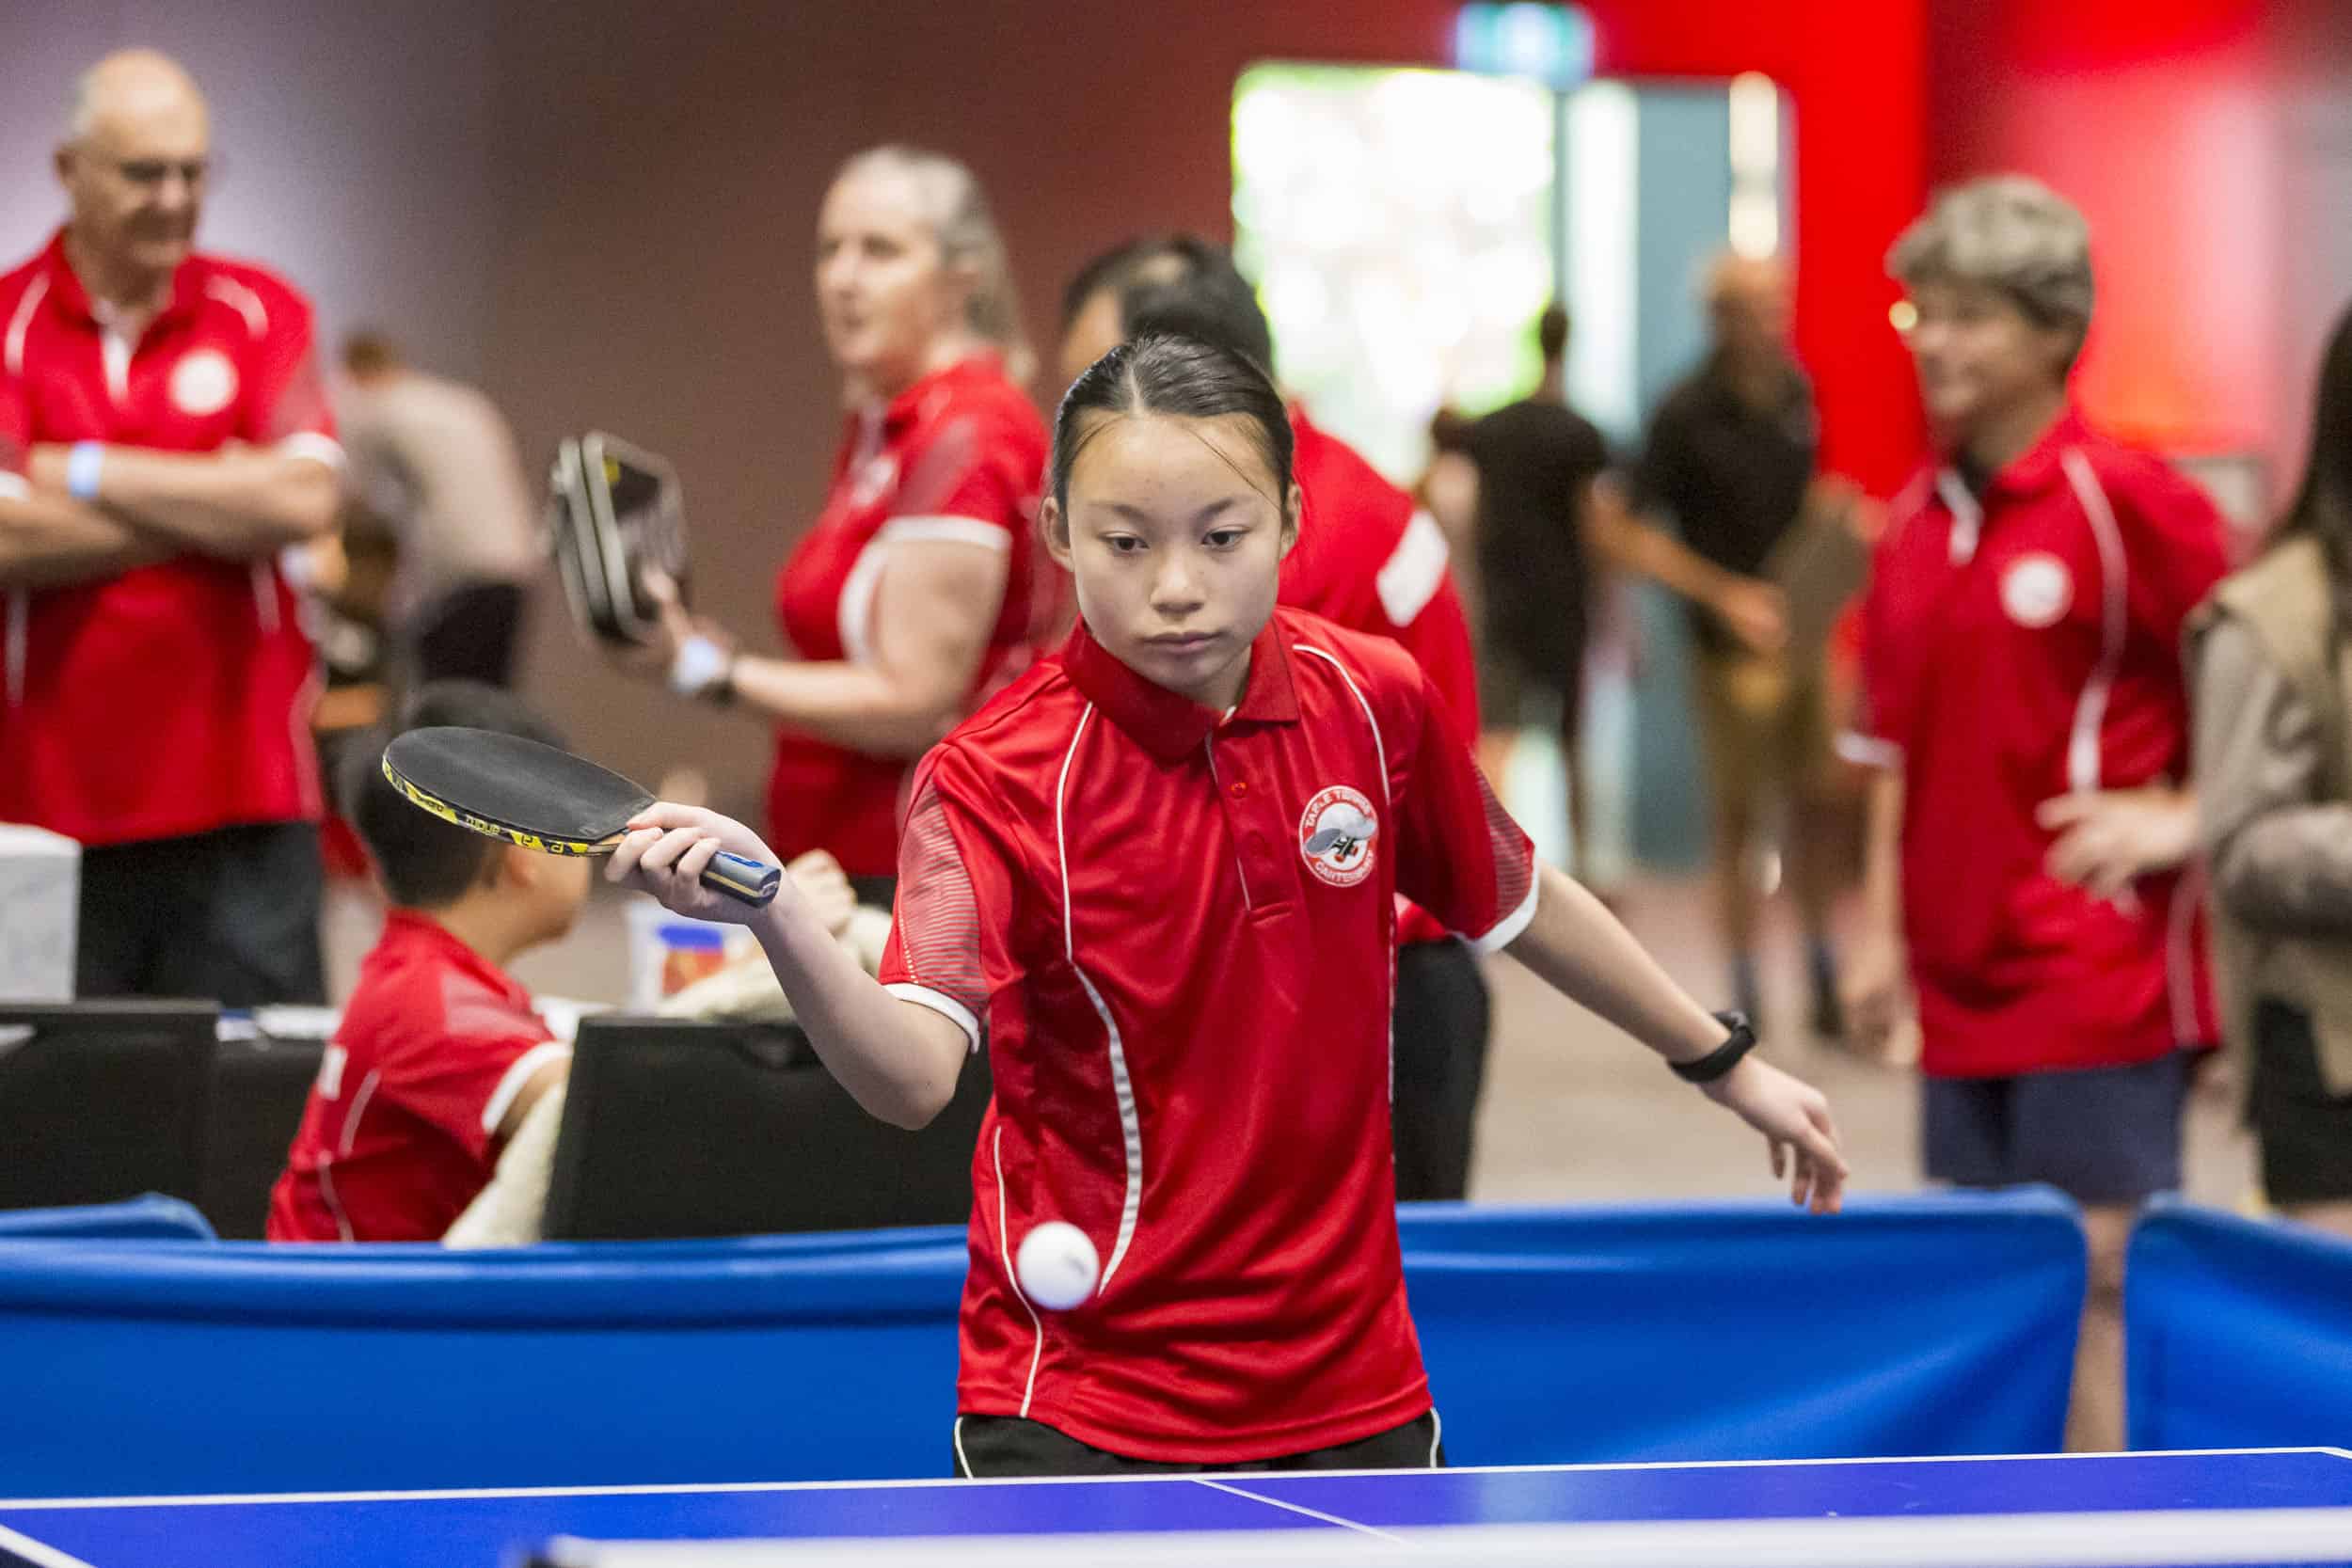 Young asian girl playing table tennis.